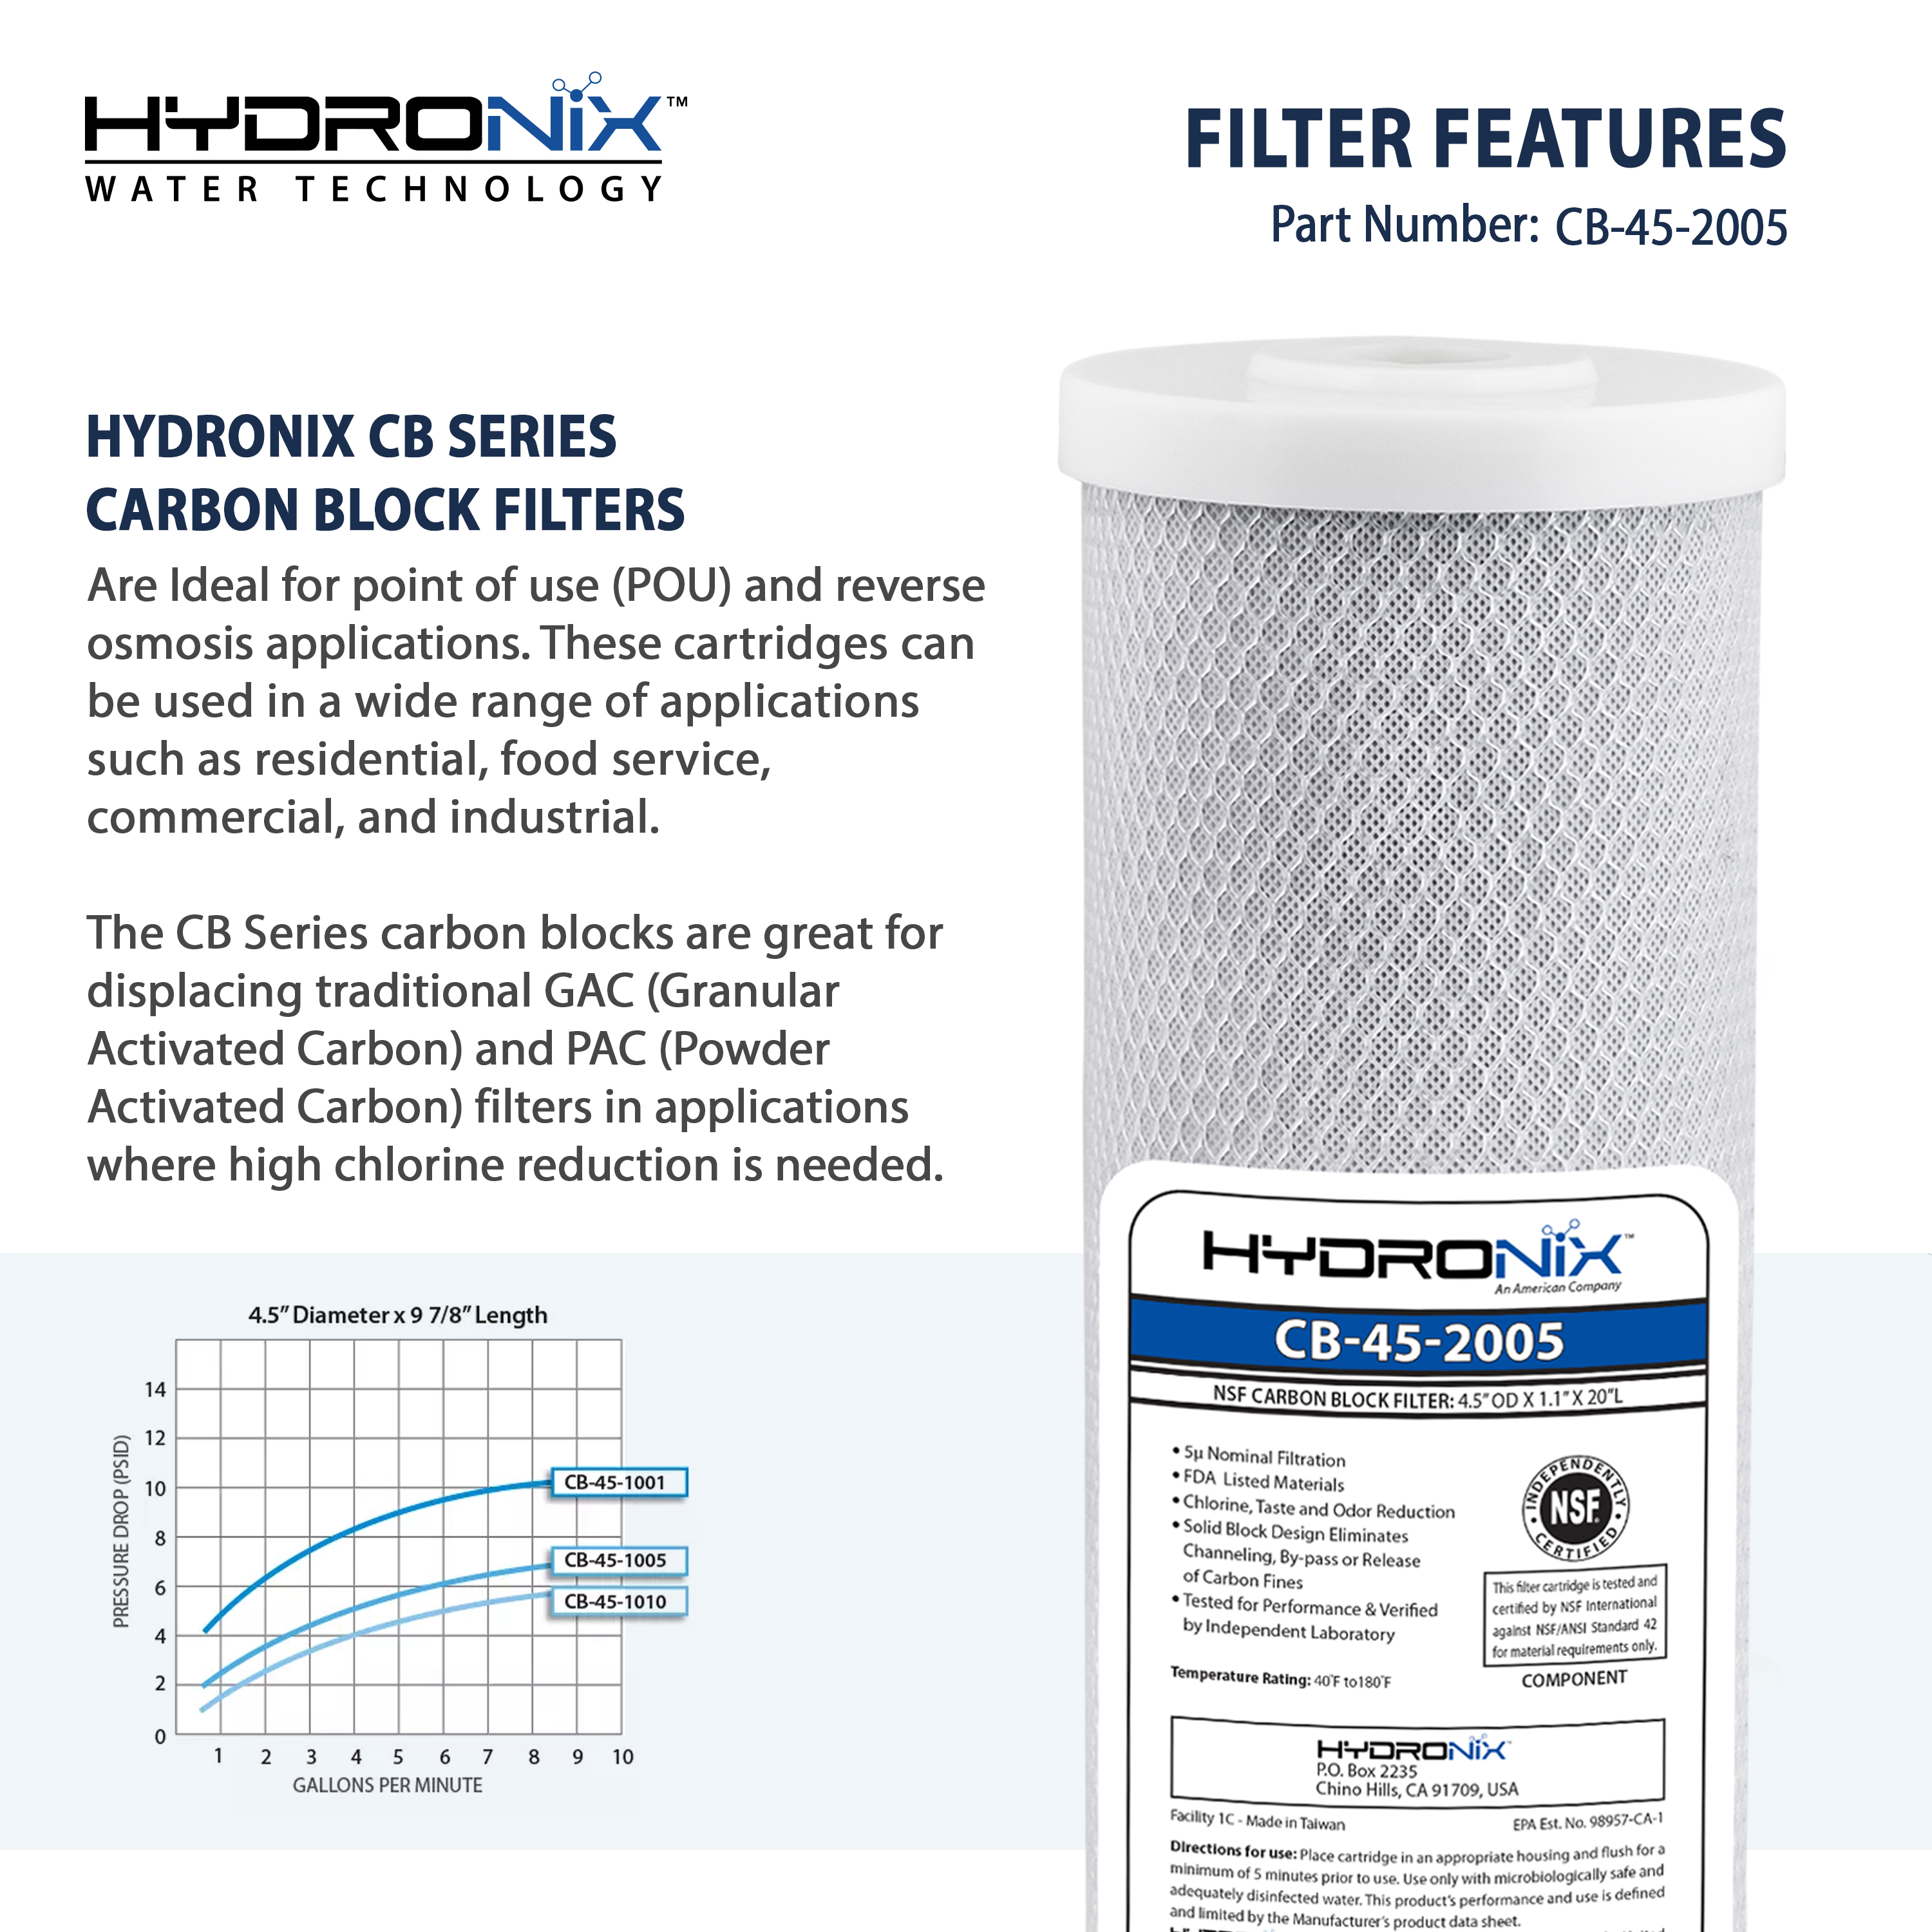 Hydronix CB-45-2005 Whole House, Commercial & Industrial NSF Coconut Carbon Block Water Filter, 4.5" x 20" - 5 micron